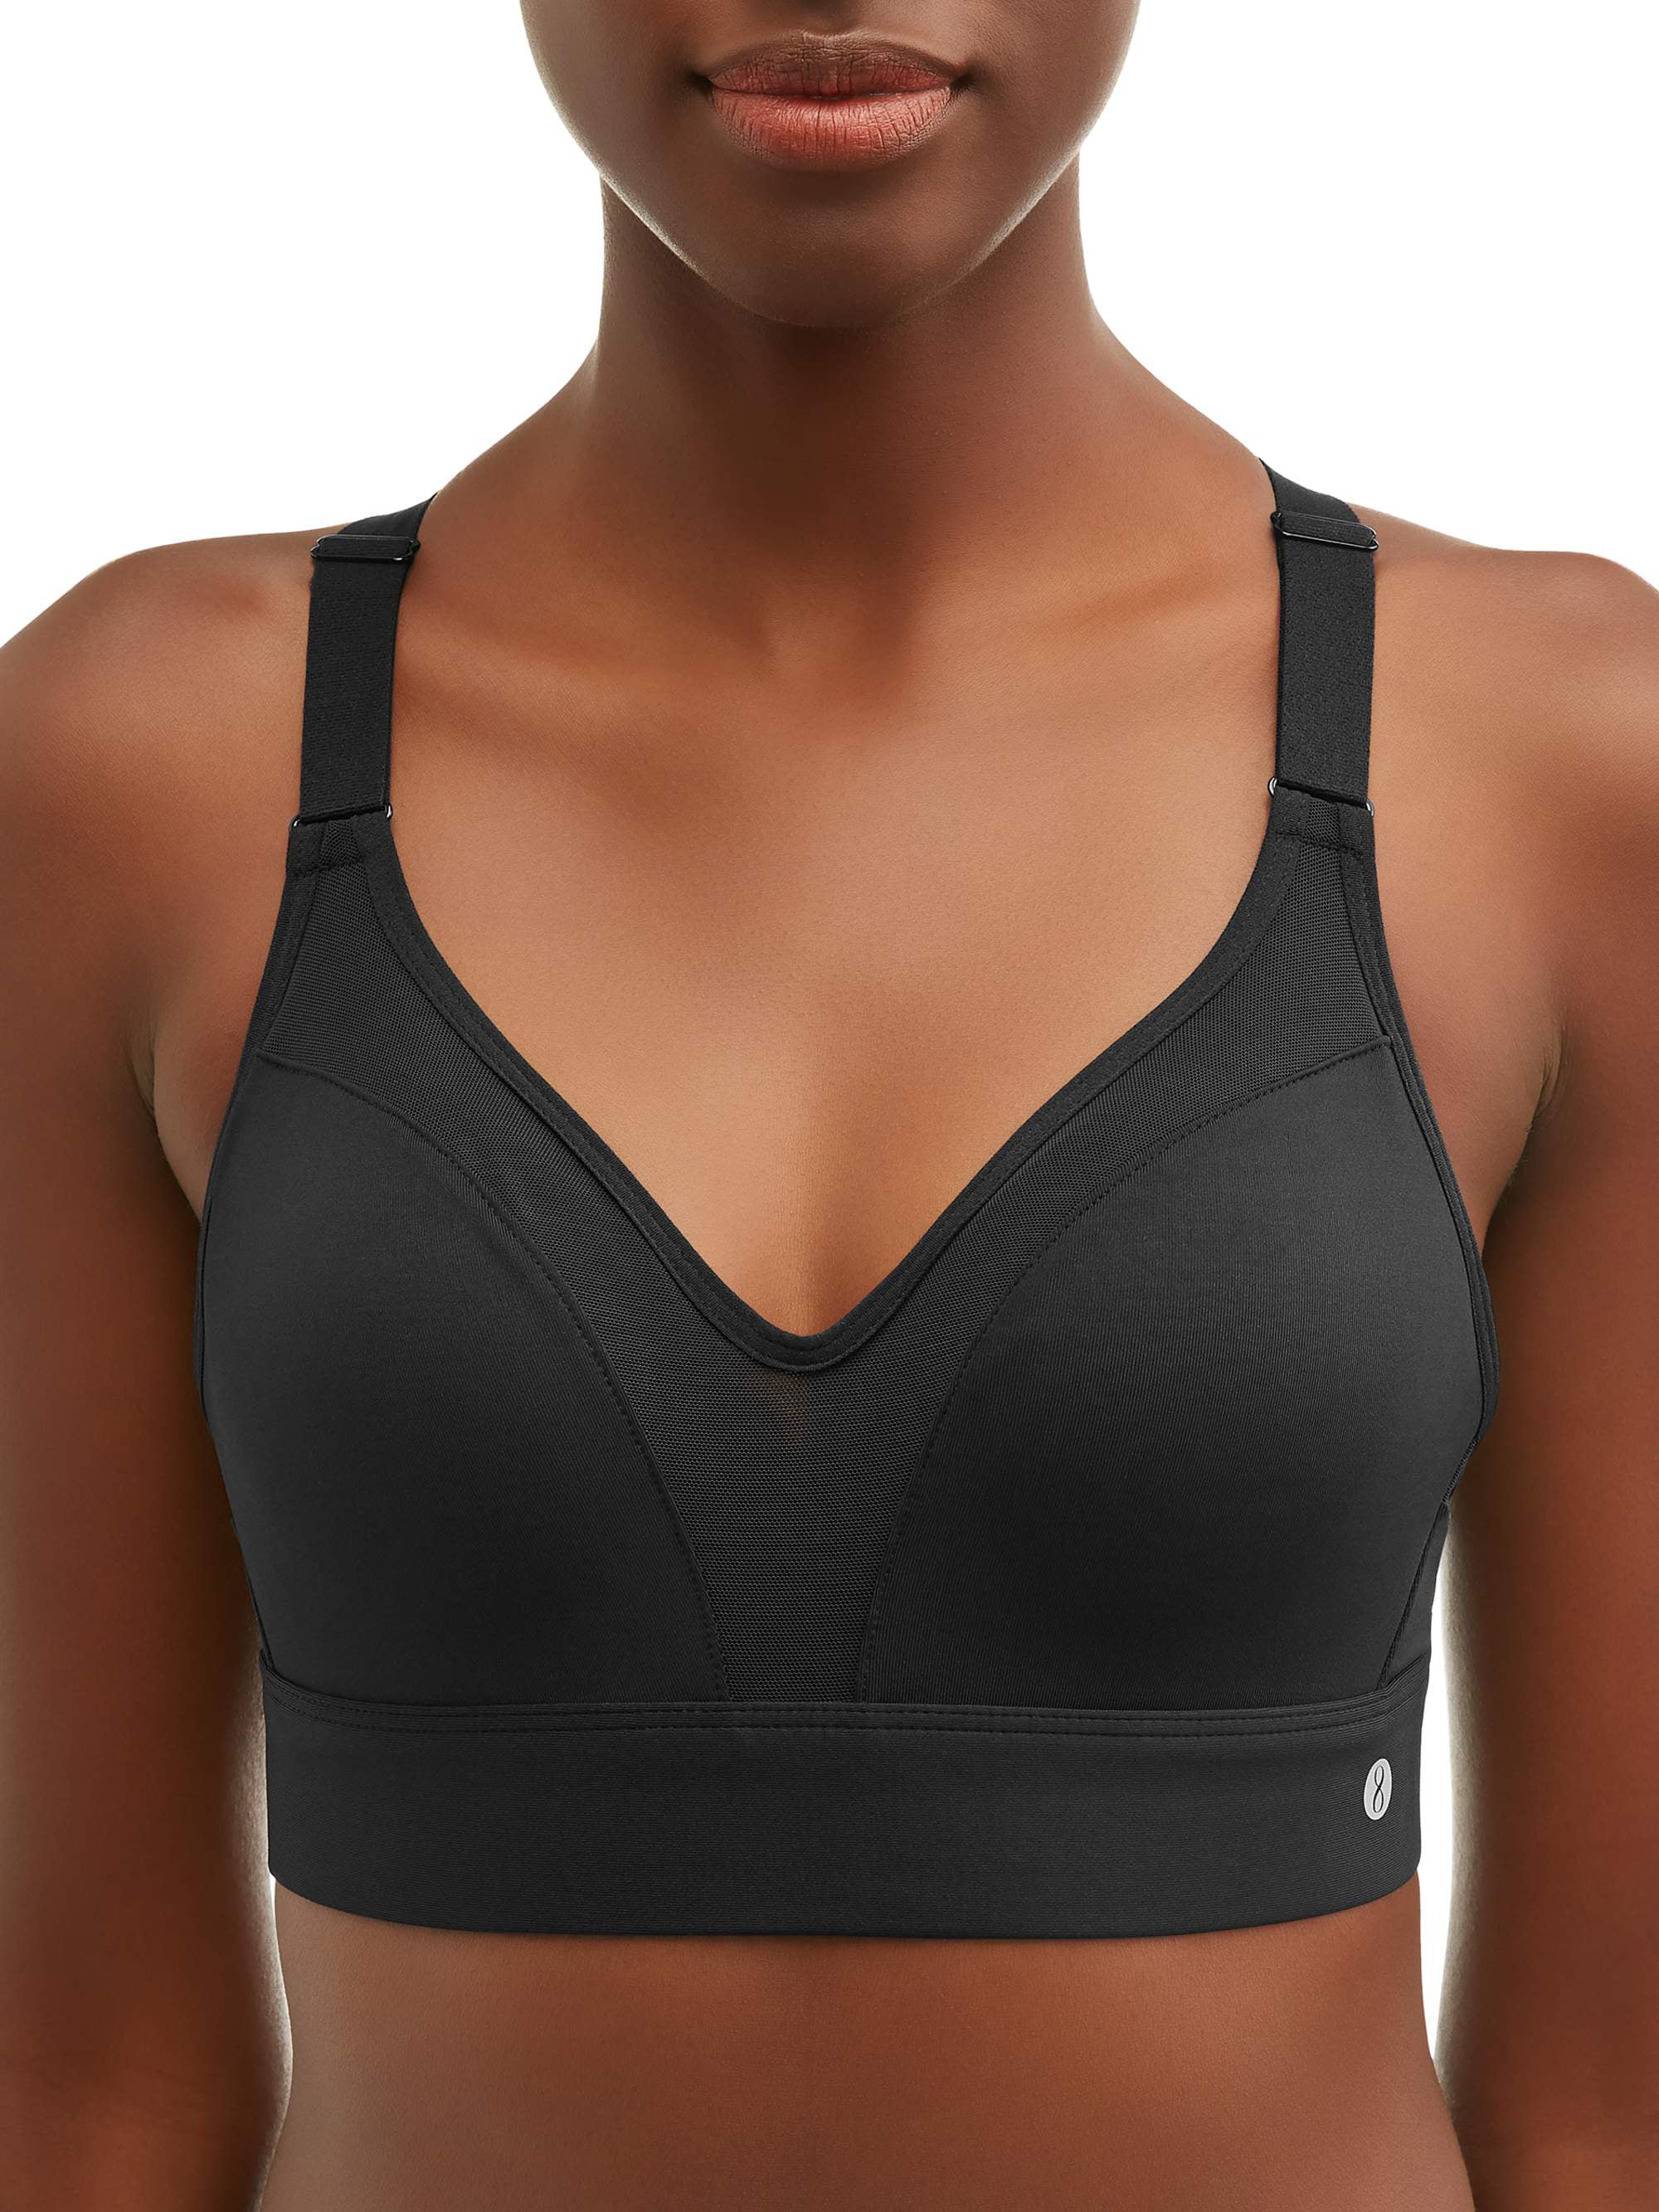 Layer 8 Women's Active High Impact Molded Sports Bra with Mesh